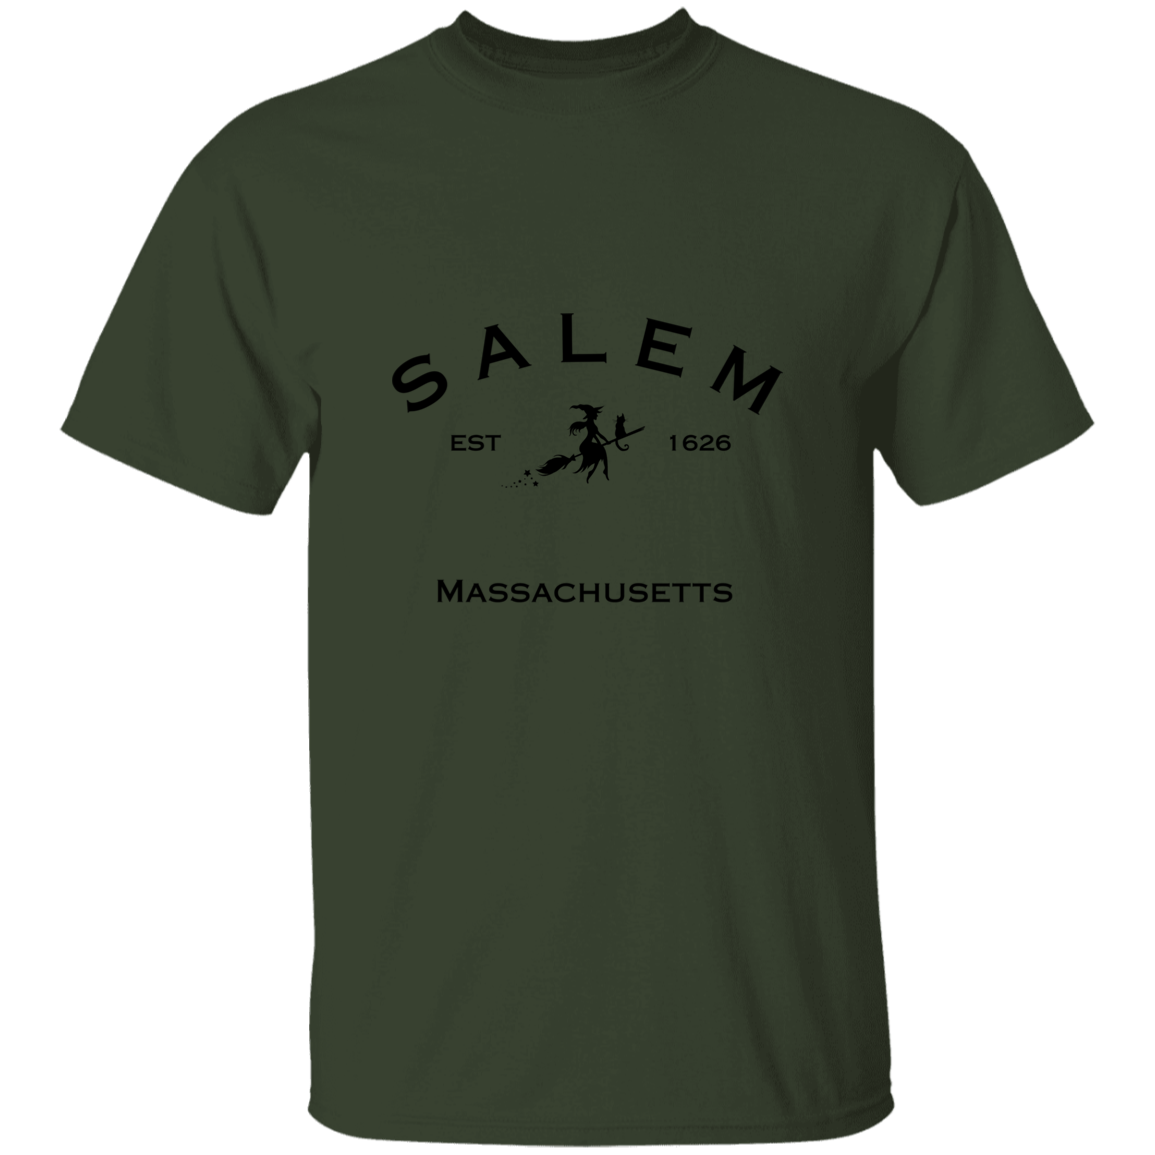 Get trendy with SALEM  Massachusetts 1626 T-Shirt - T-Shirts available at Good Gift Company. Grab yours for $24.95 today!